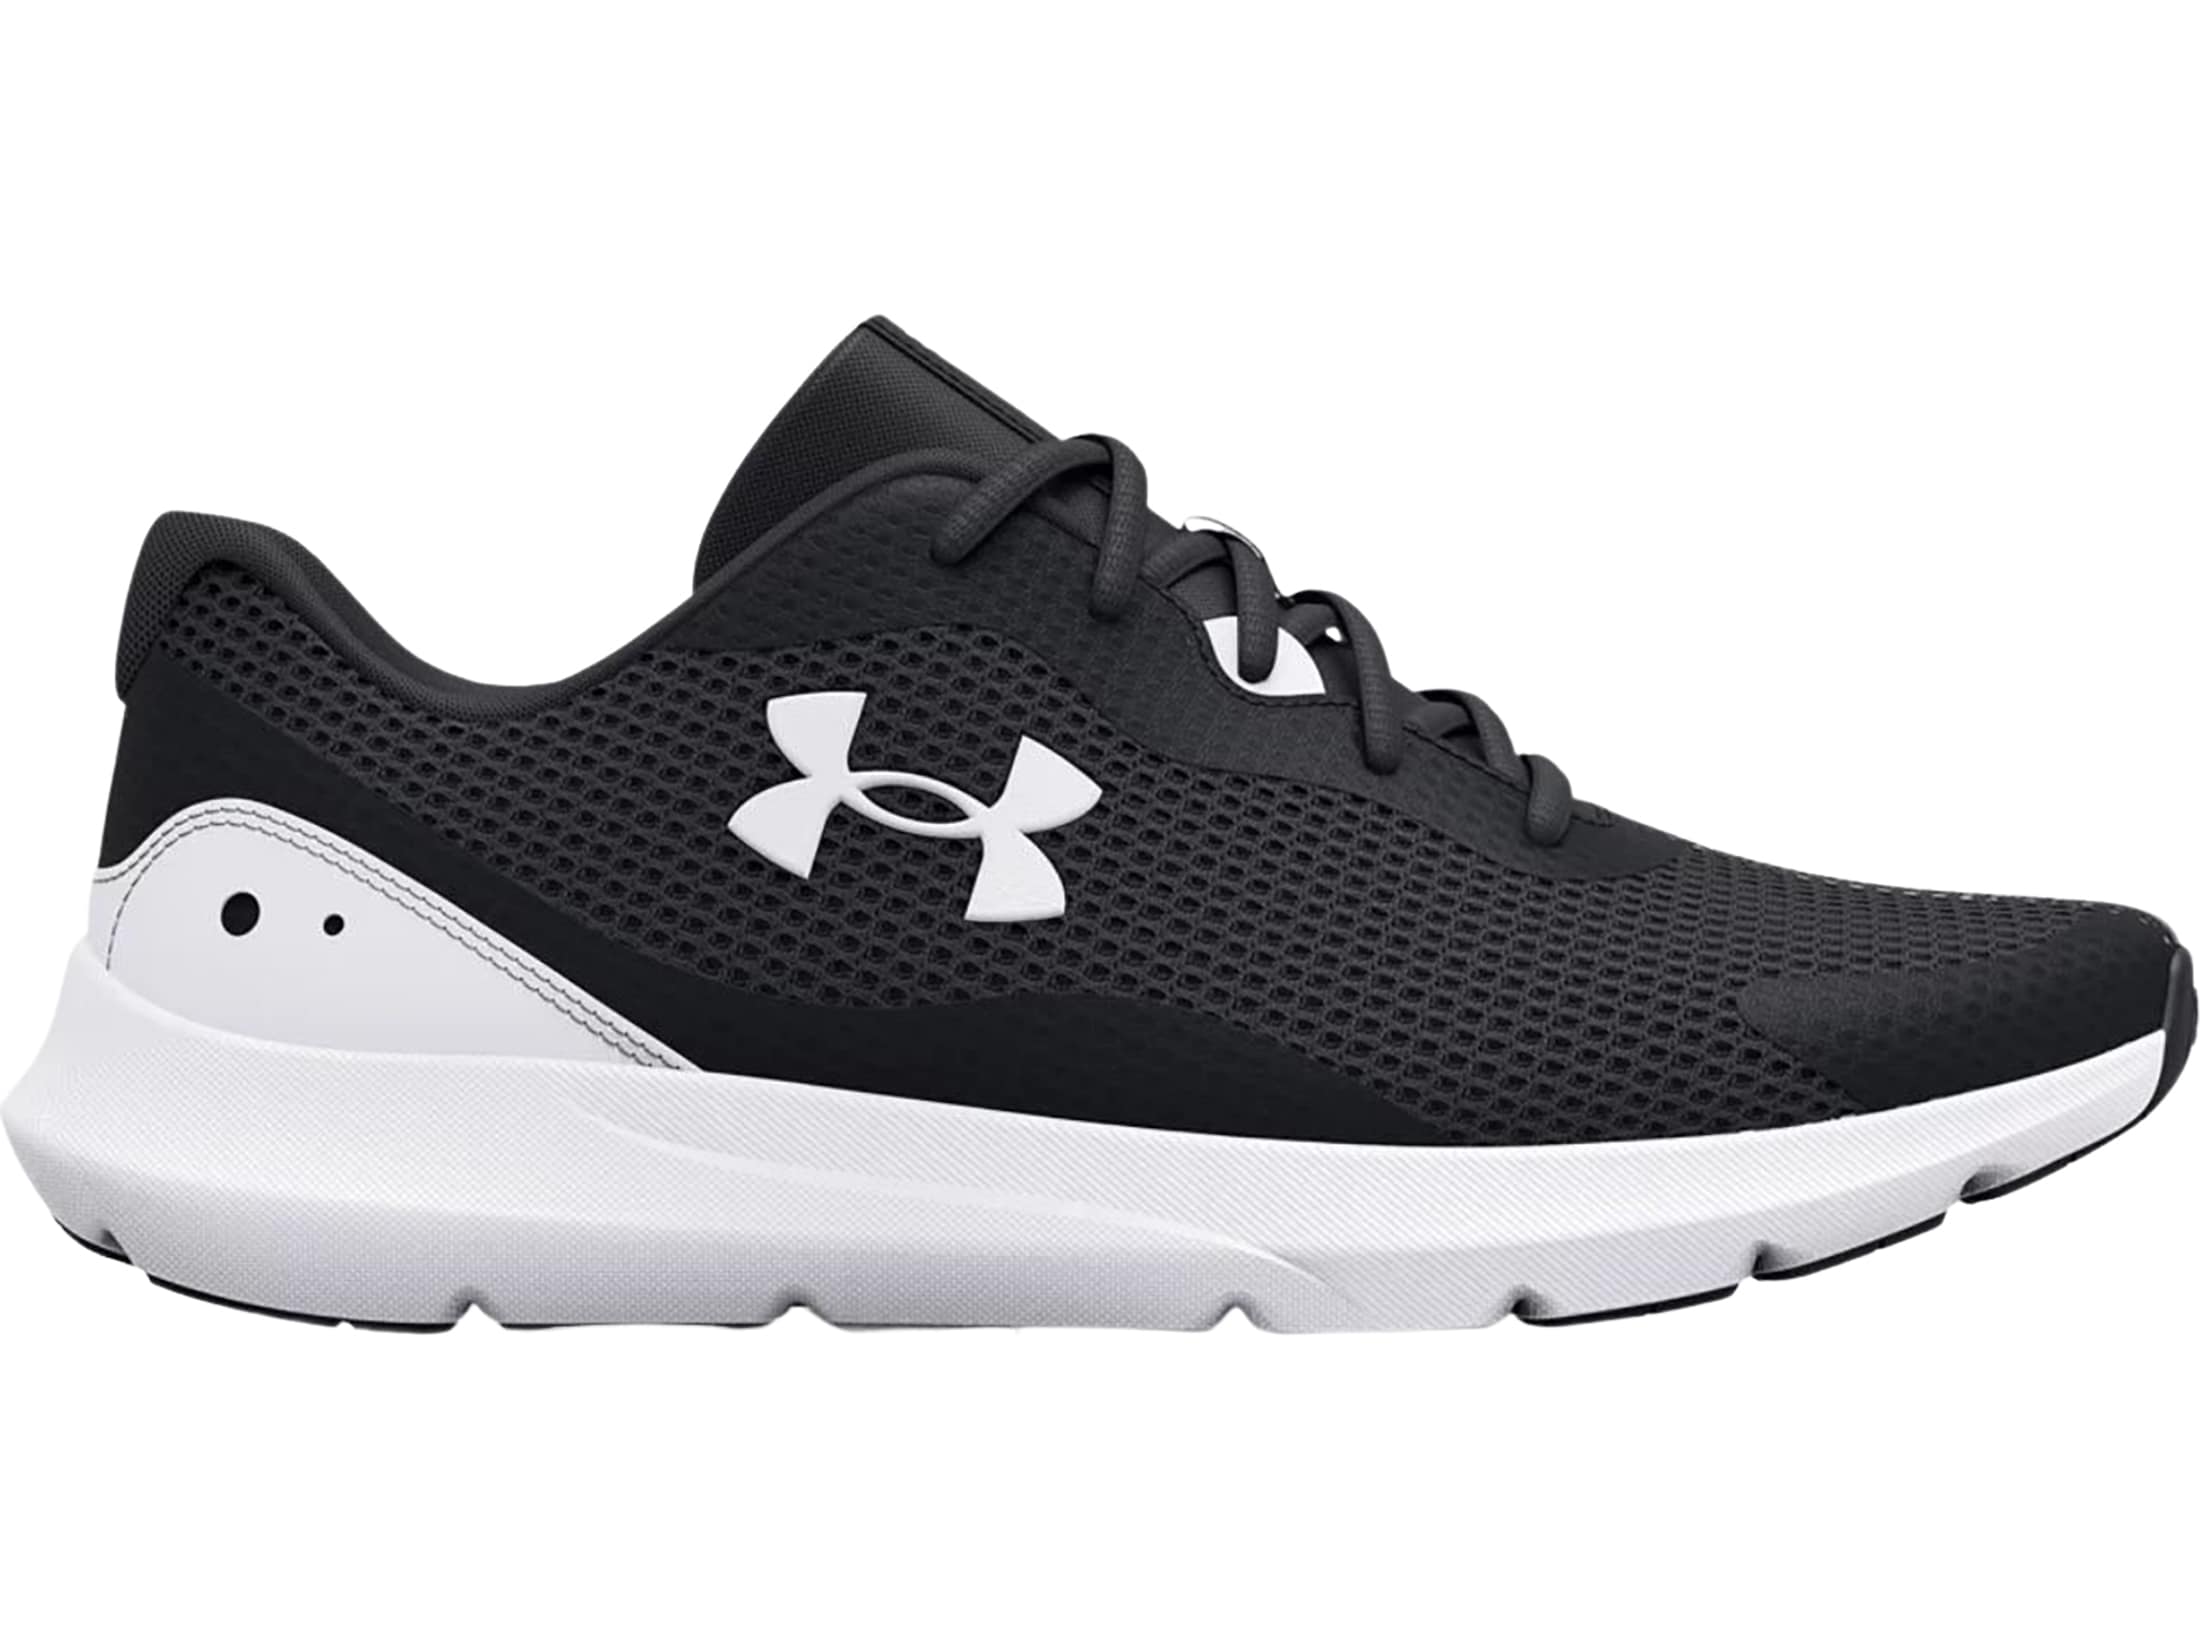 Under Armour Surge 3 Running Shoes Synthetic Black/White/White Men's 8